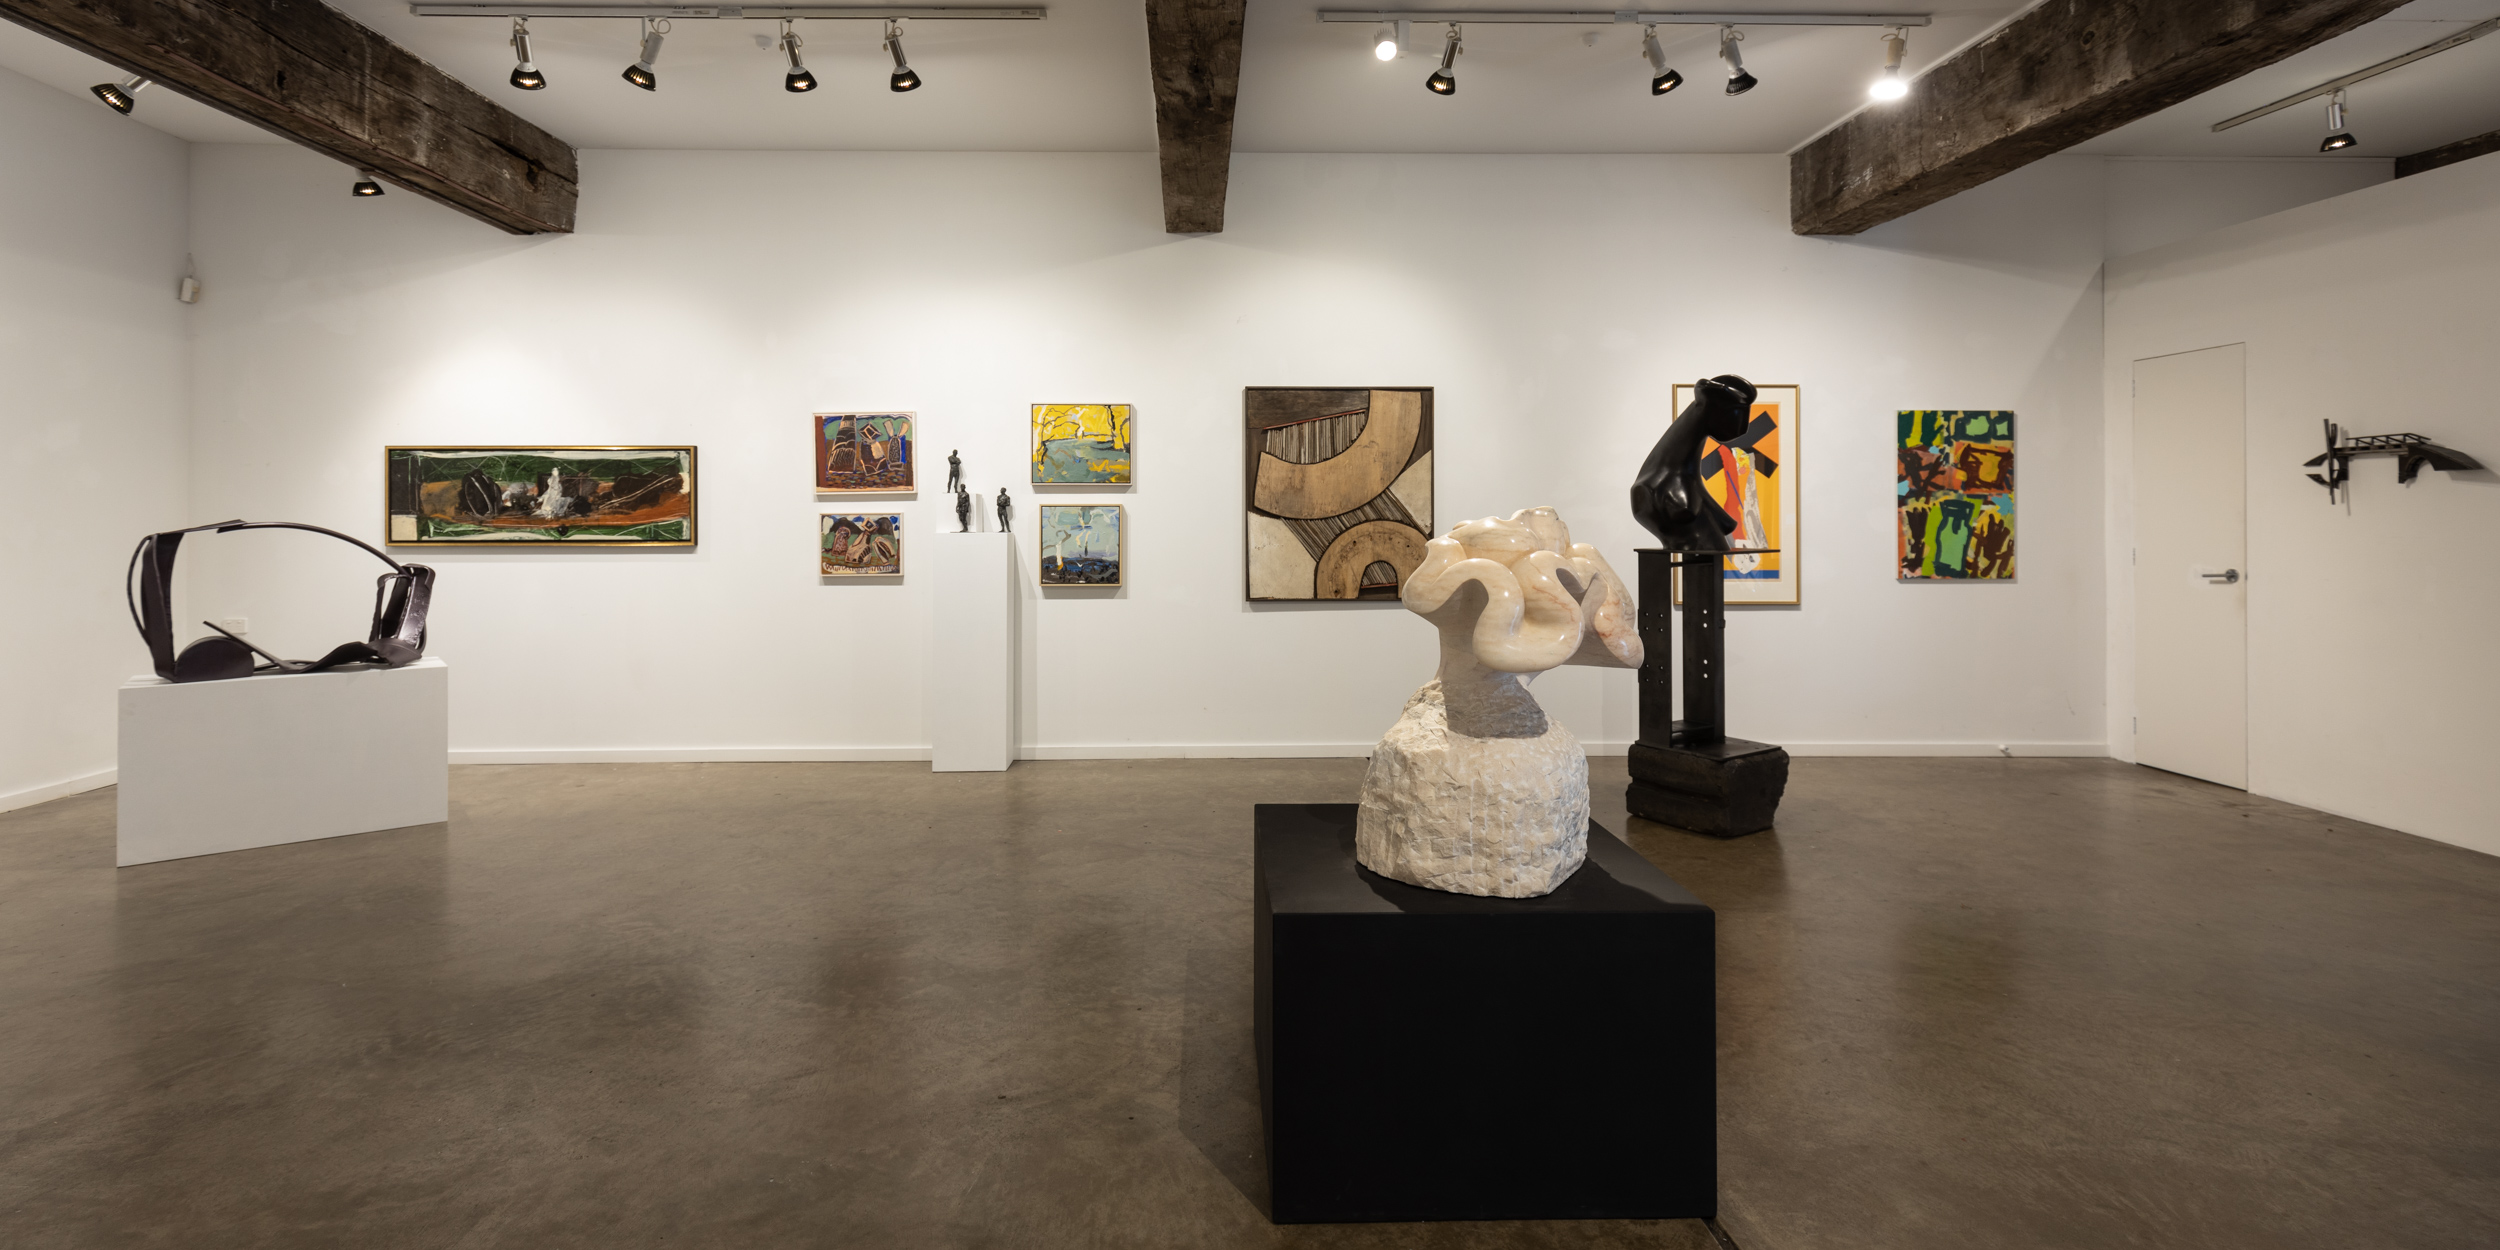 Defiance Gallery celebrates 25 years Group exhibition